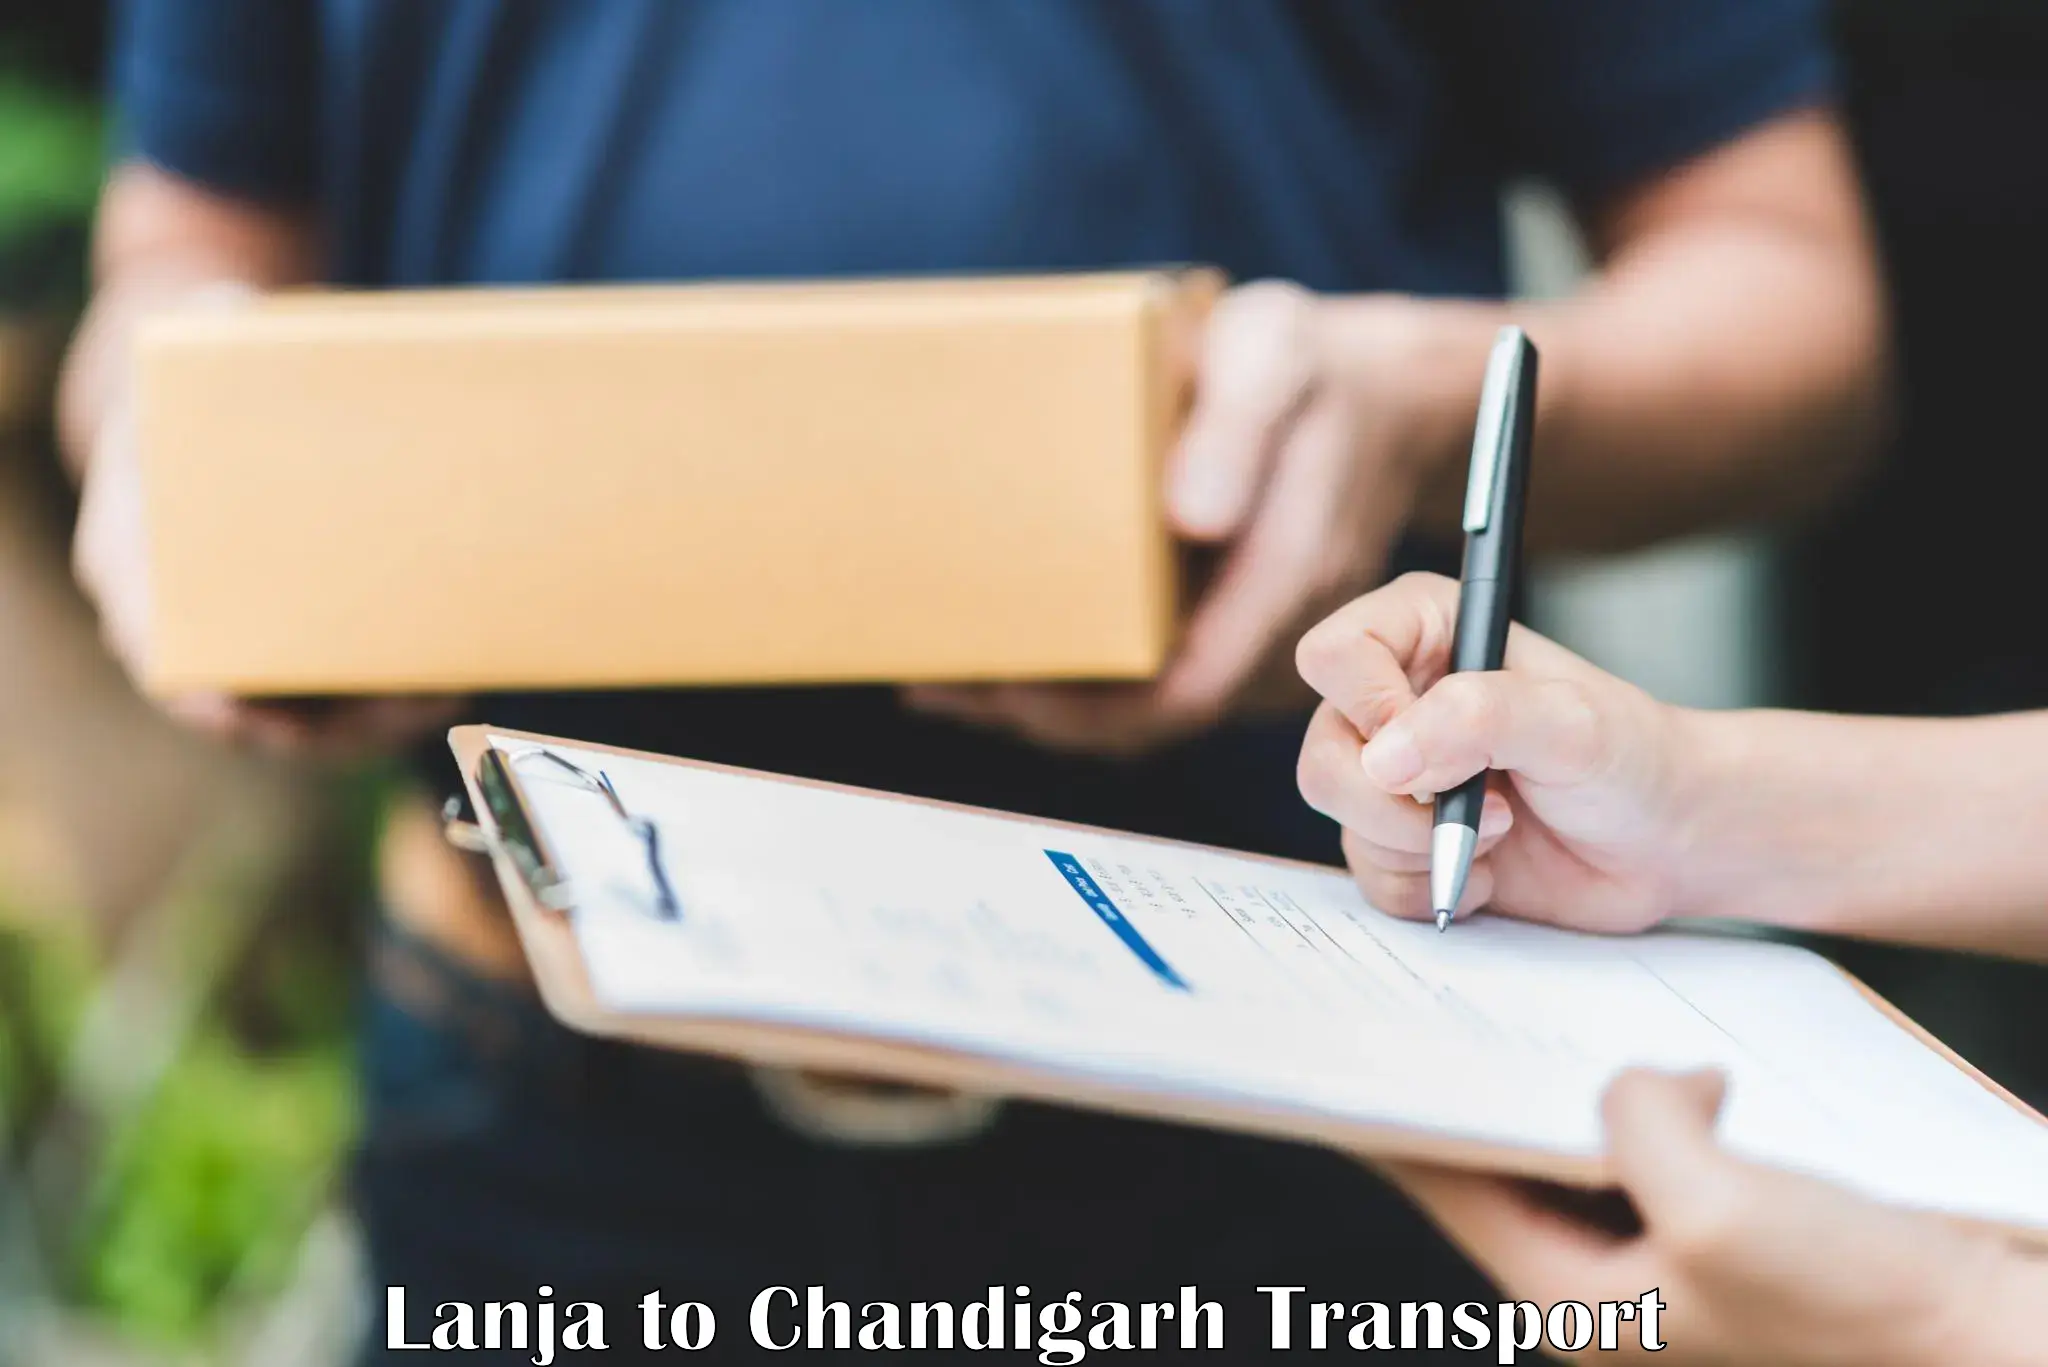 Delivery service Lanja to Chandigarh